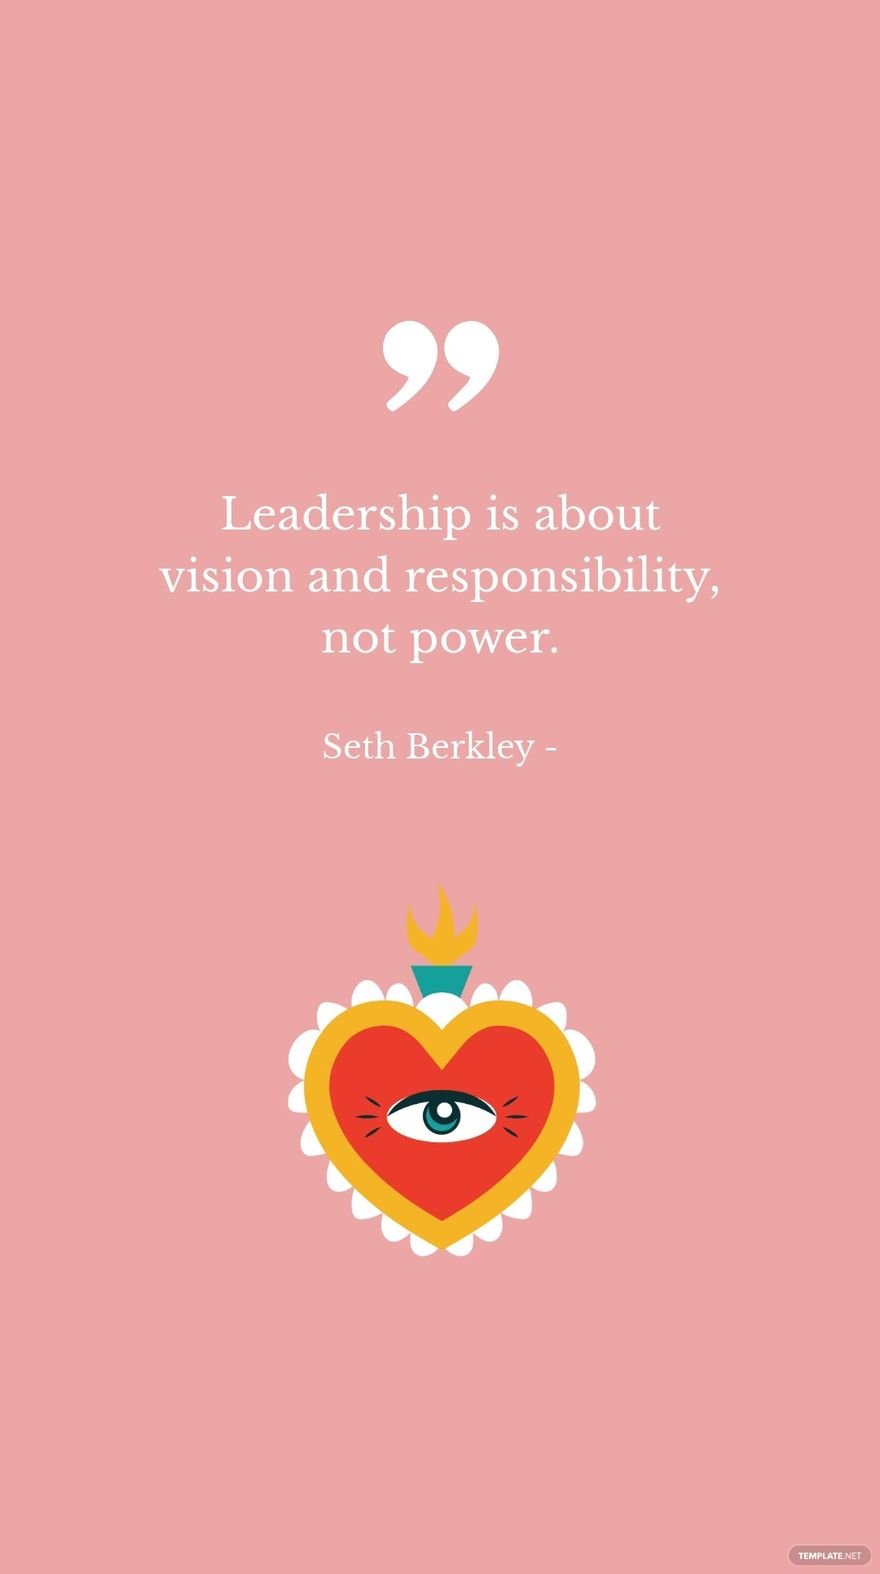 Free Seth Berkley - Leadership is about vision and responsibility, not power.